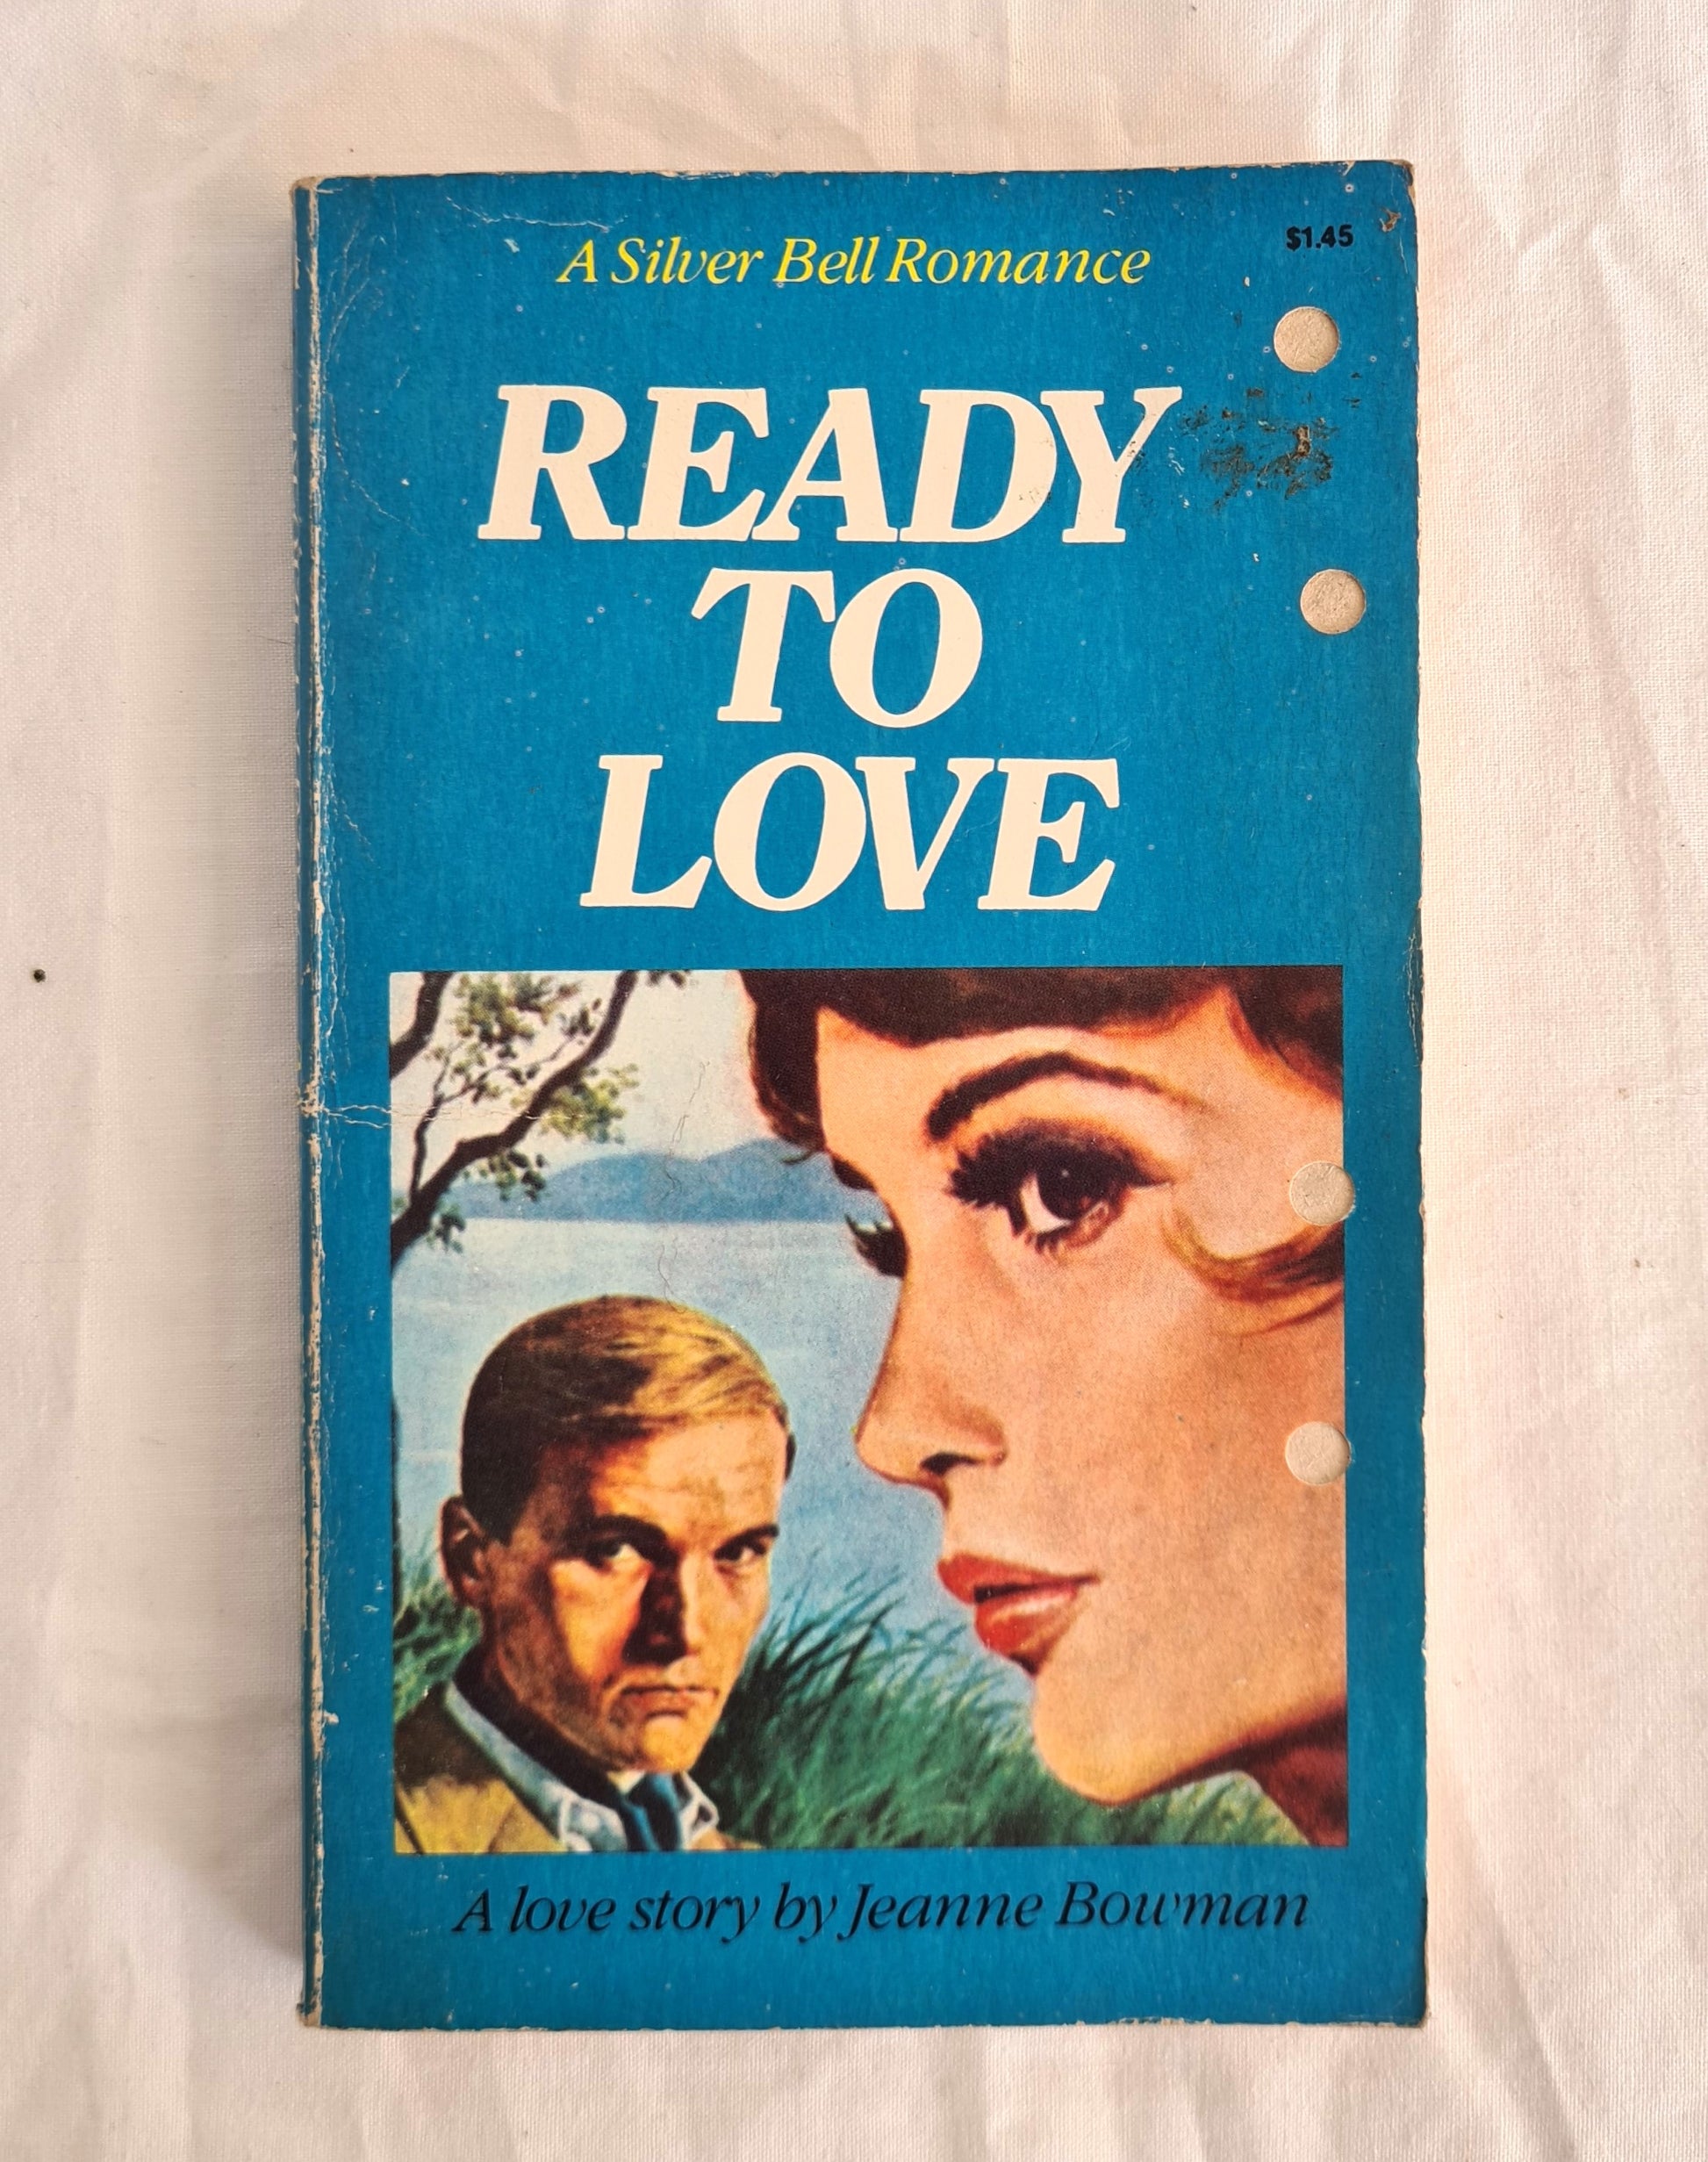 Ready To Love  by Jeanne Bowman  The Complete Edition  Silver Bell Romances